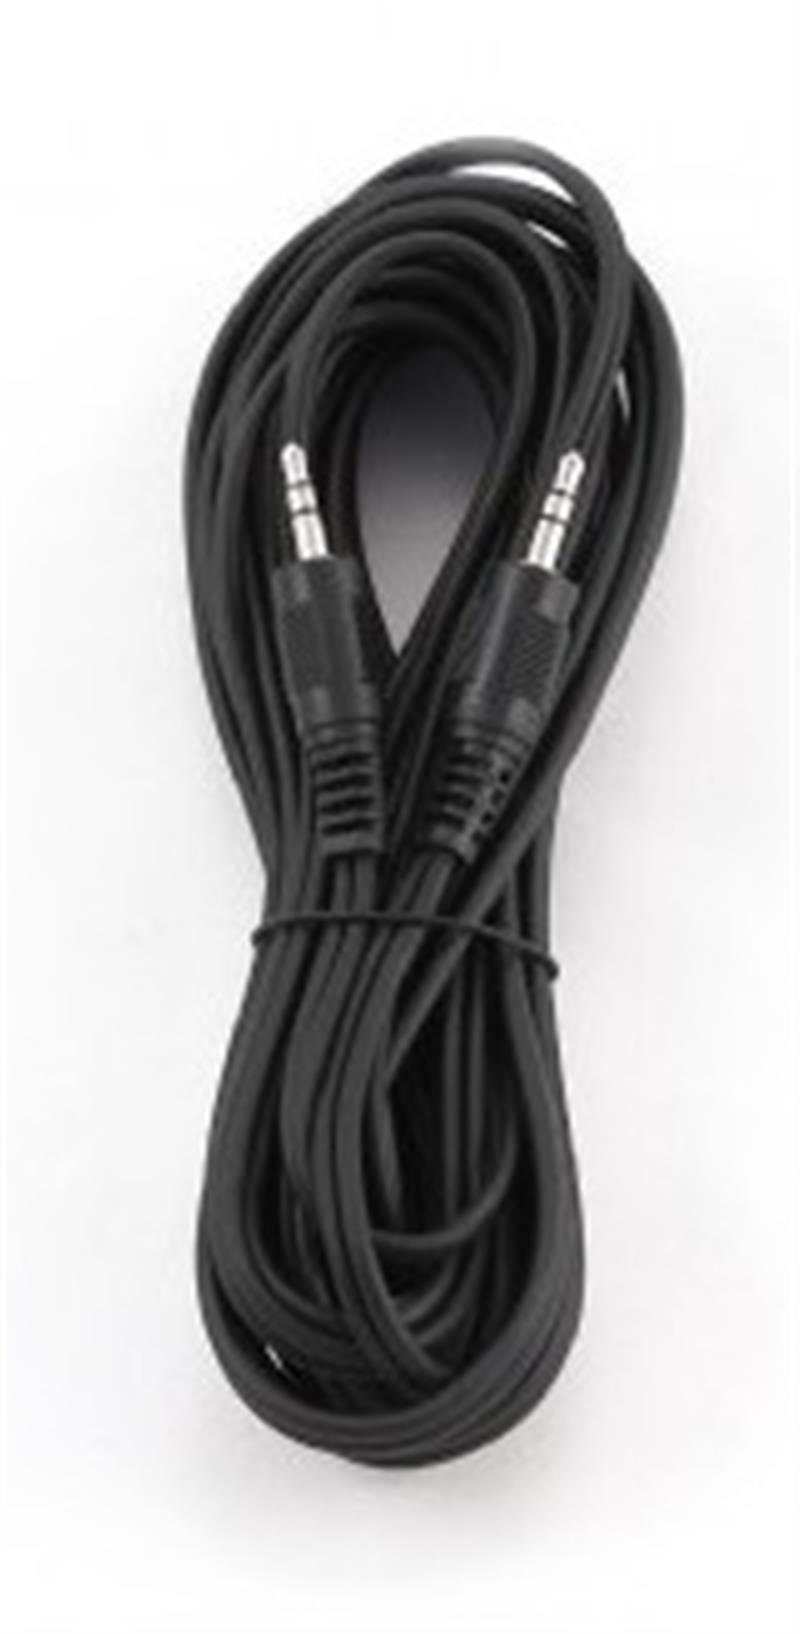 Gembird 3 5 mm stereo audio cable 5 m jack male jack male *3 5MMM